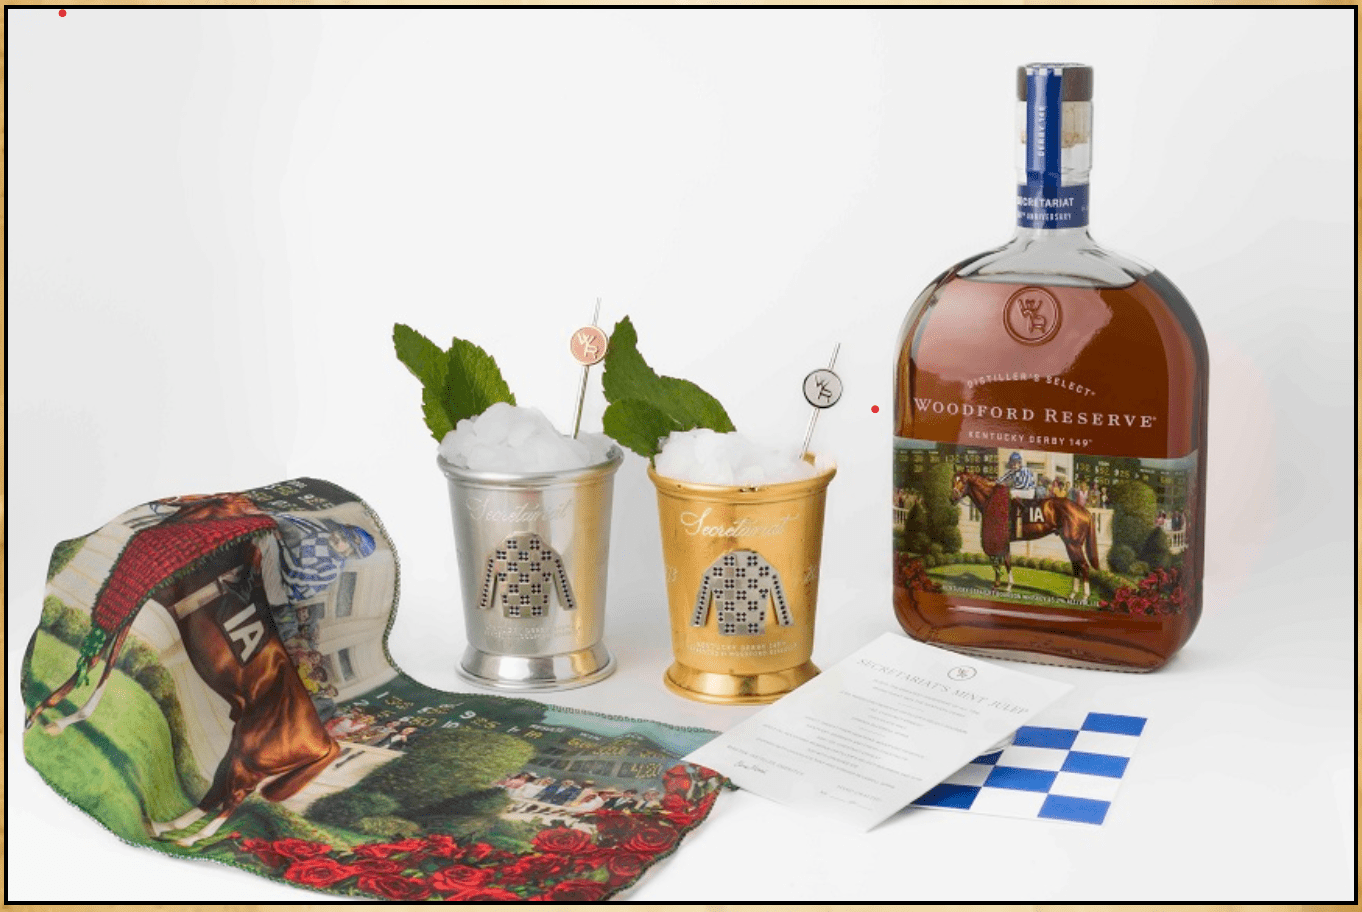 A display of woodford reserve bourbon, two mint julep cups with mint leaves, and derby-themed decorations, including a program and a pillow.